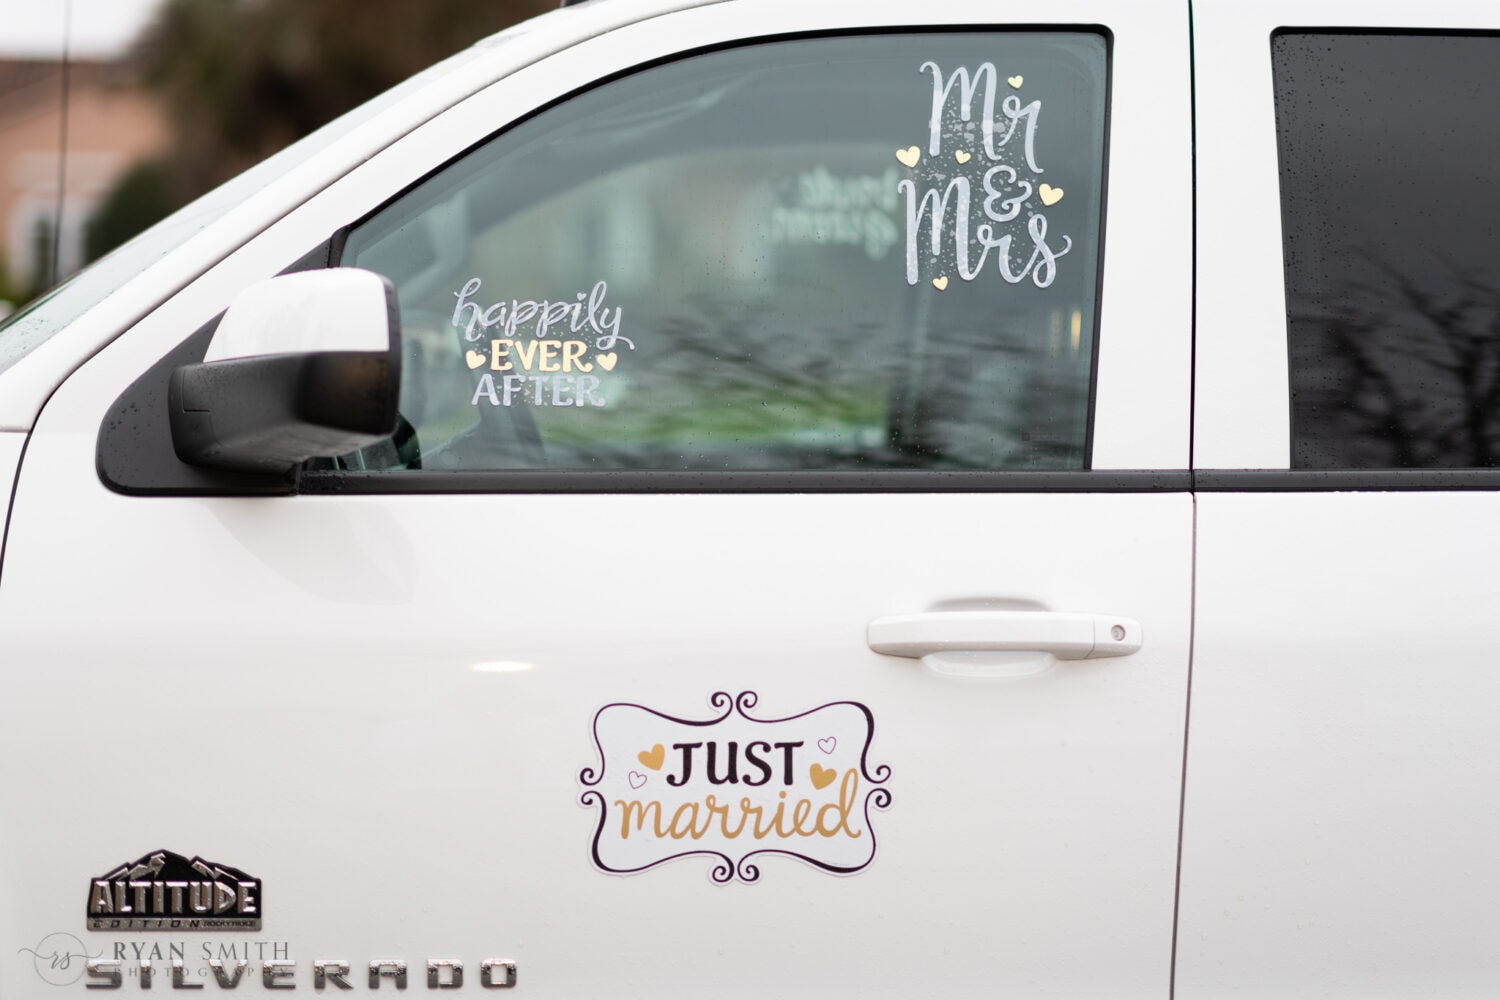 Just married on the truck - Grande Dunes - Myrtle Beach